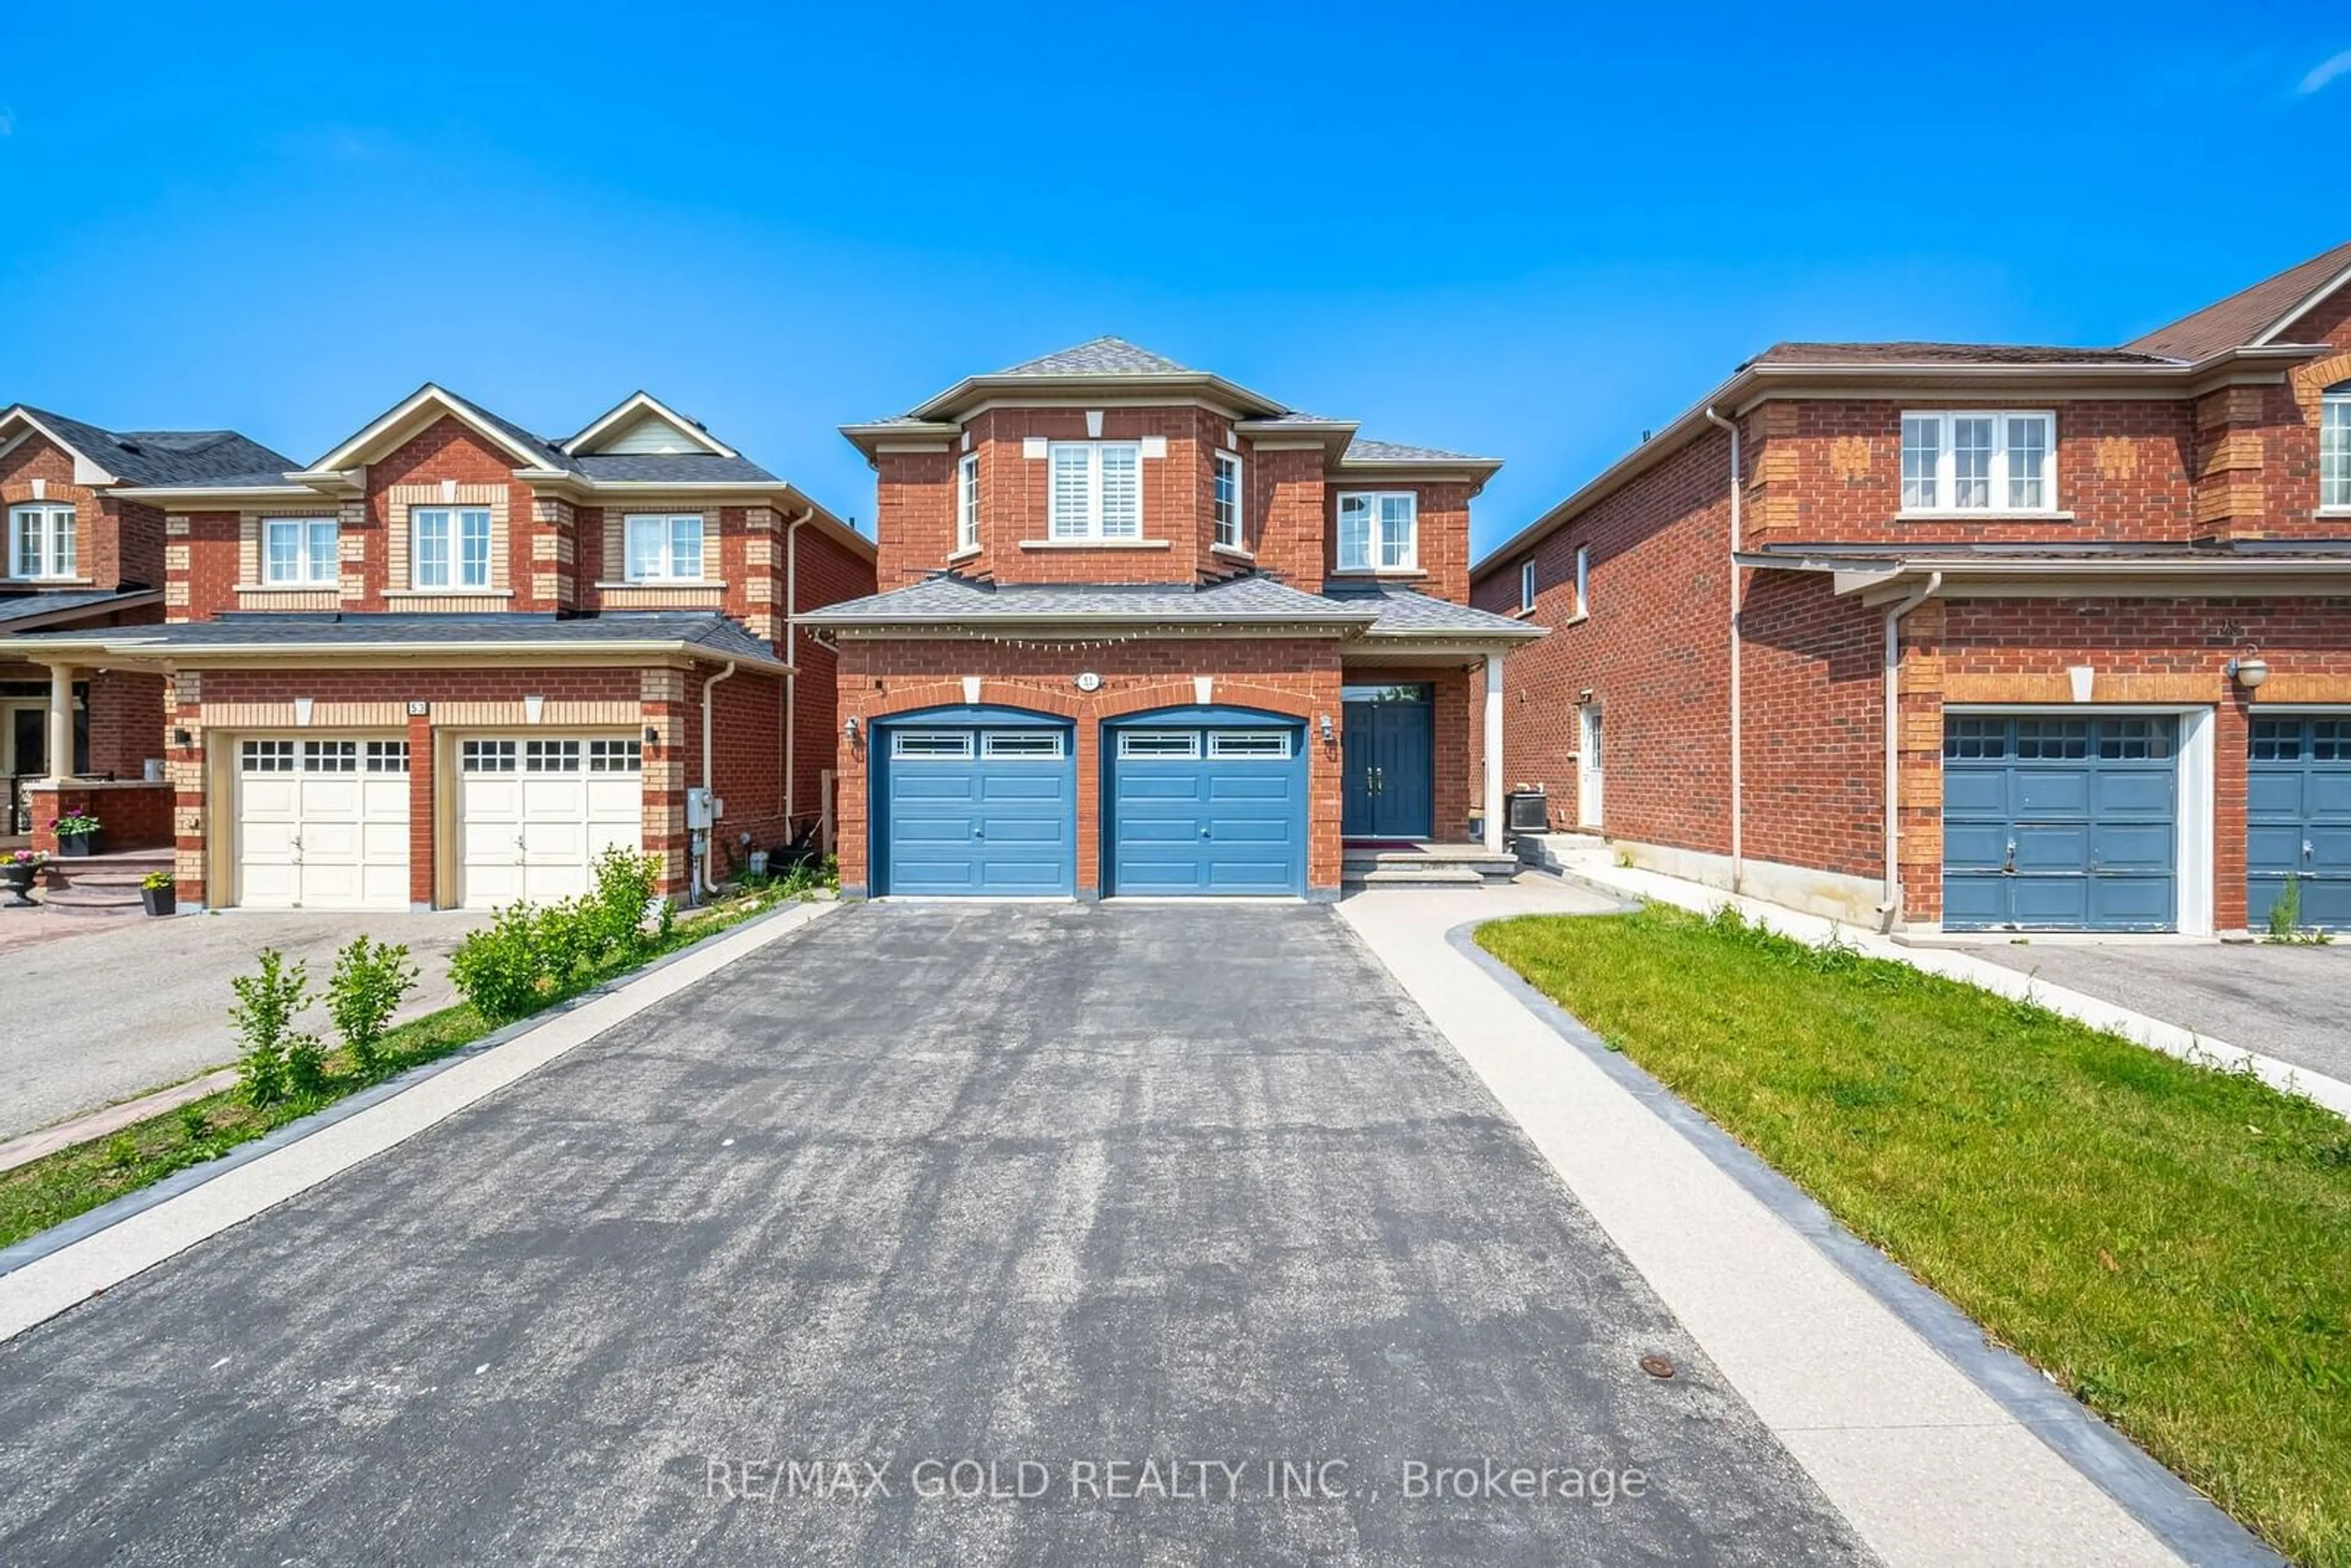 Home with brick exterior material for 51 Turquoise Cres, Brampton Ontario L6P 2R3